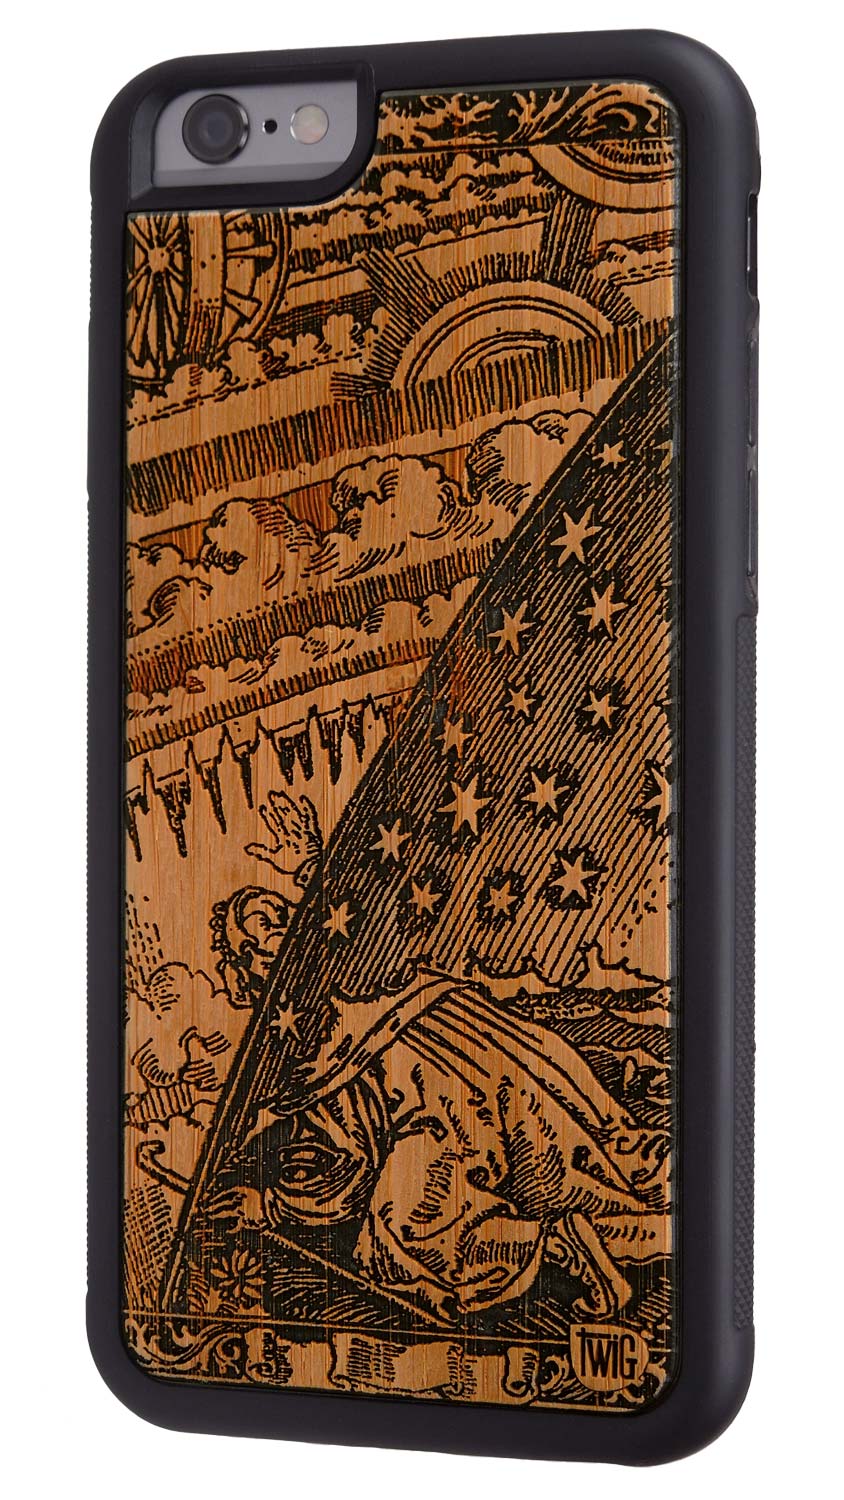 Beyond The Firmament - Bamboo iPhone Case, iPhone Case - Twig Case Co.